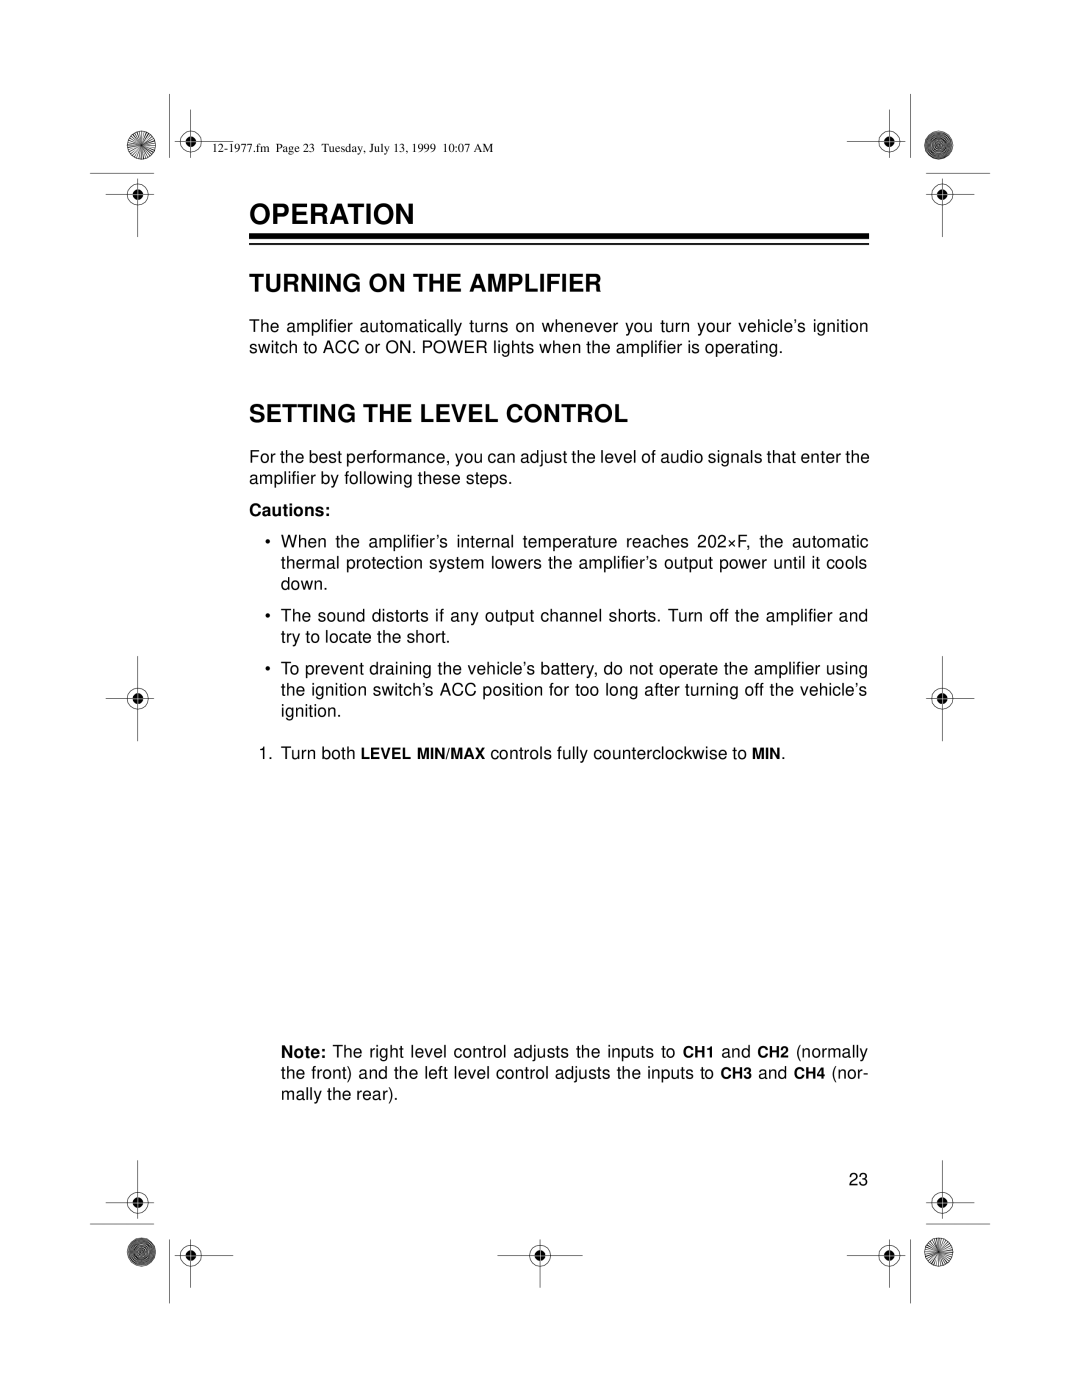 Radio Shack 85 owner manual Operation, Turning On The Amplifier, Setting The Level Control, Cautions 